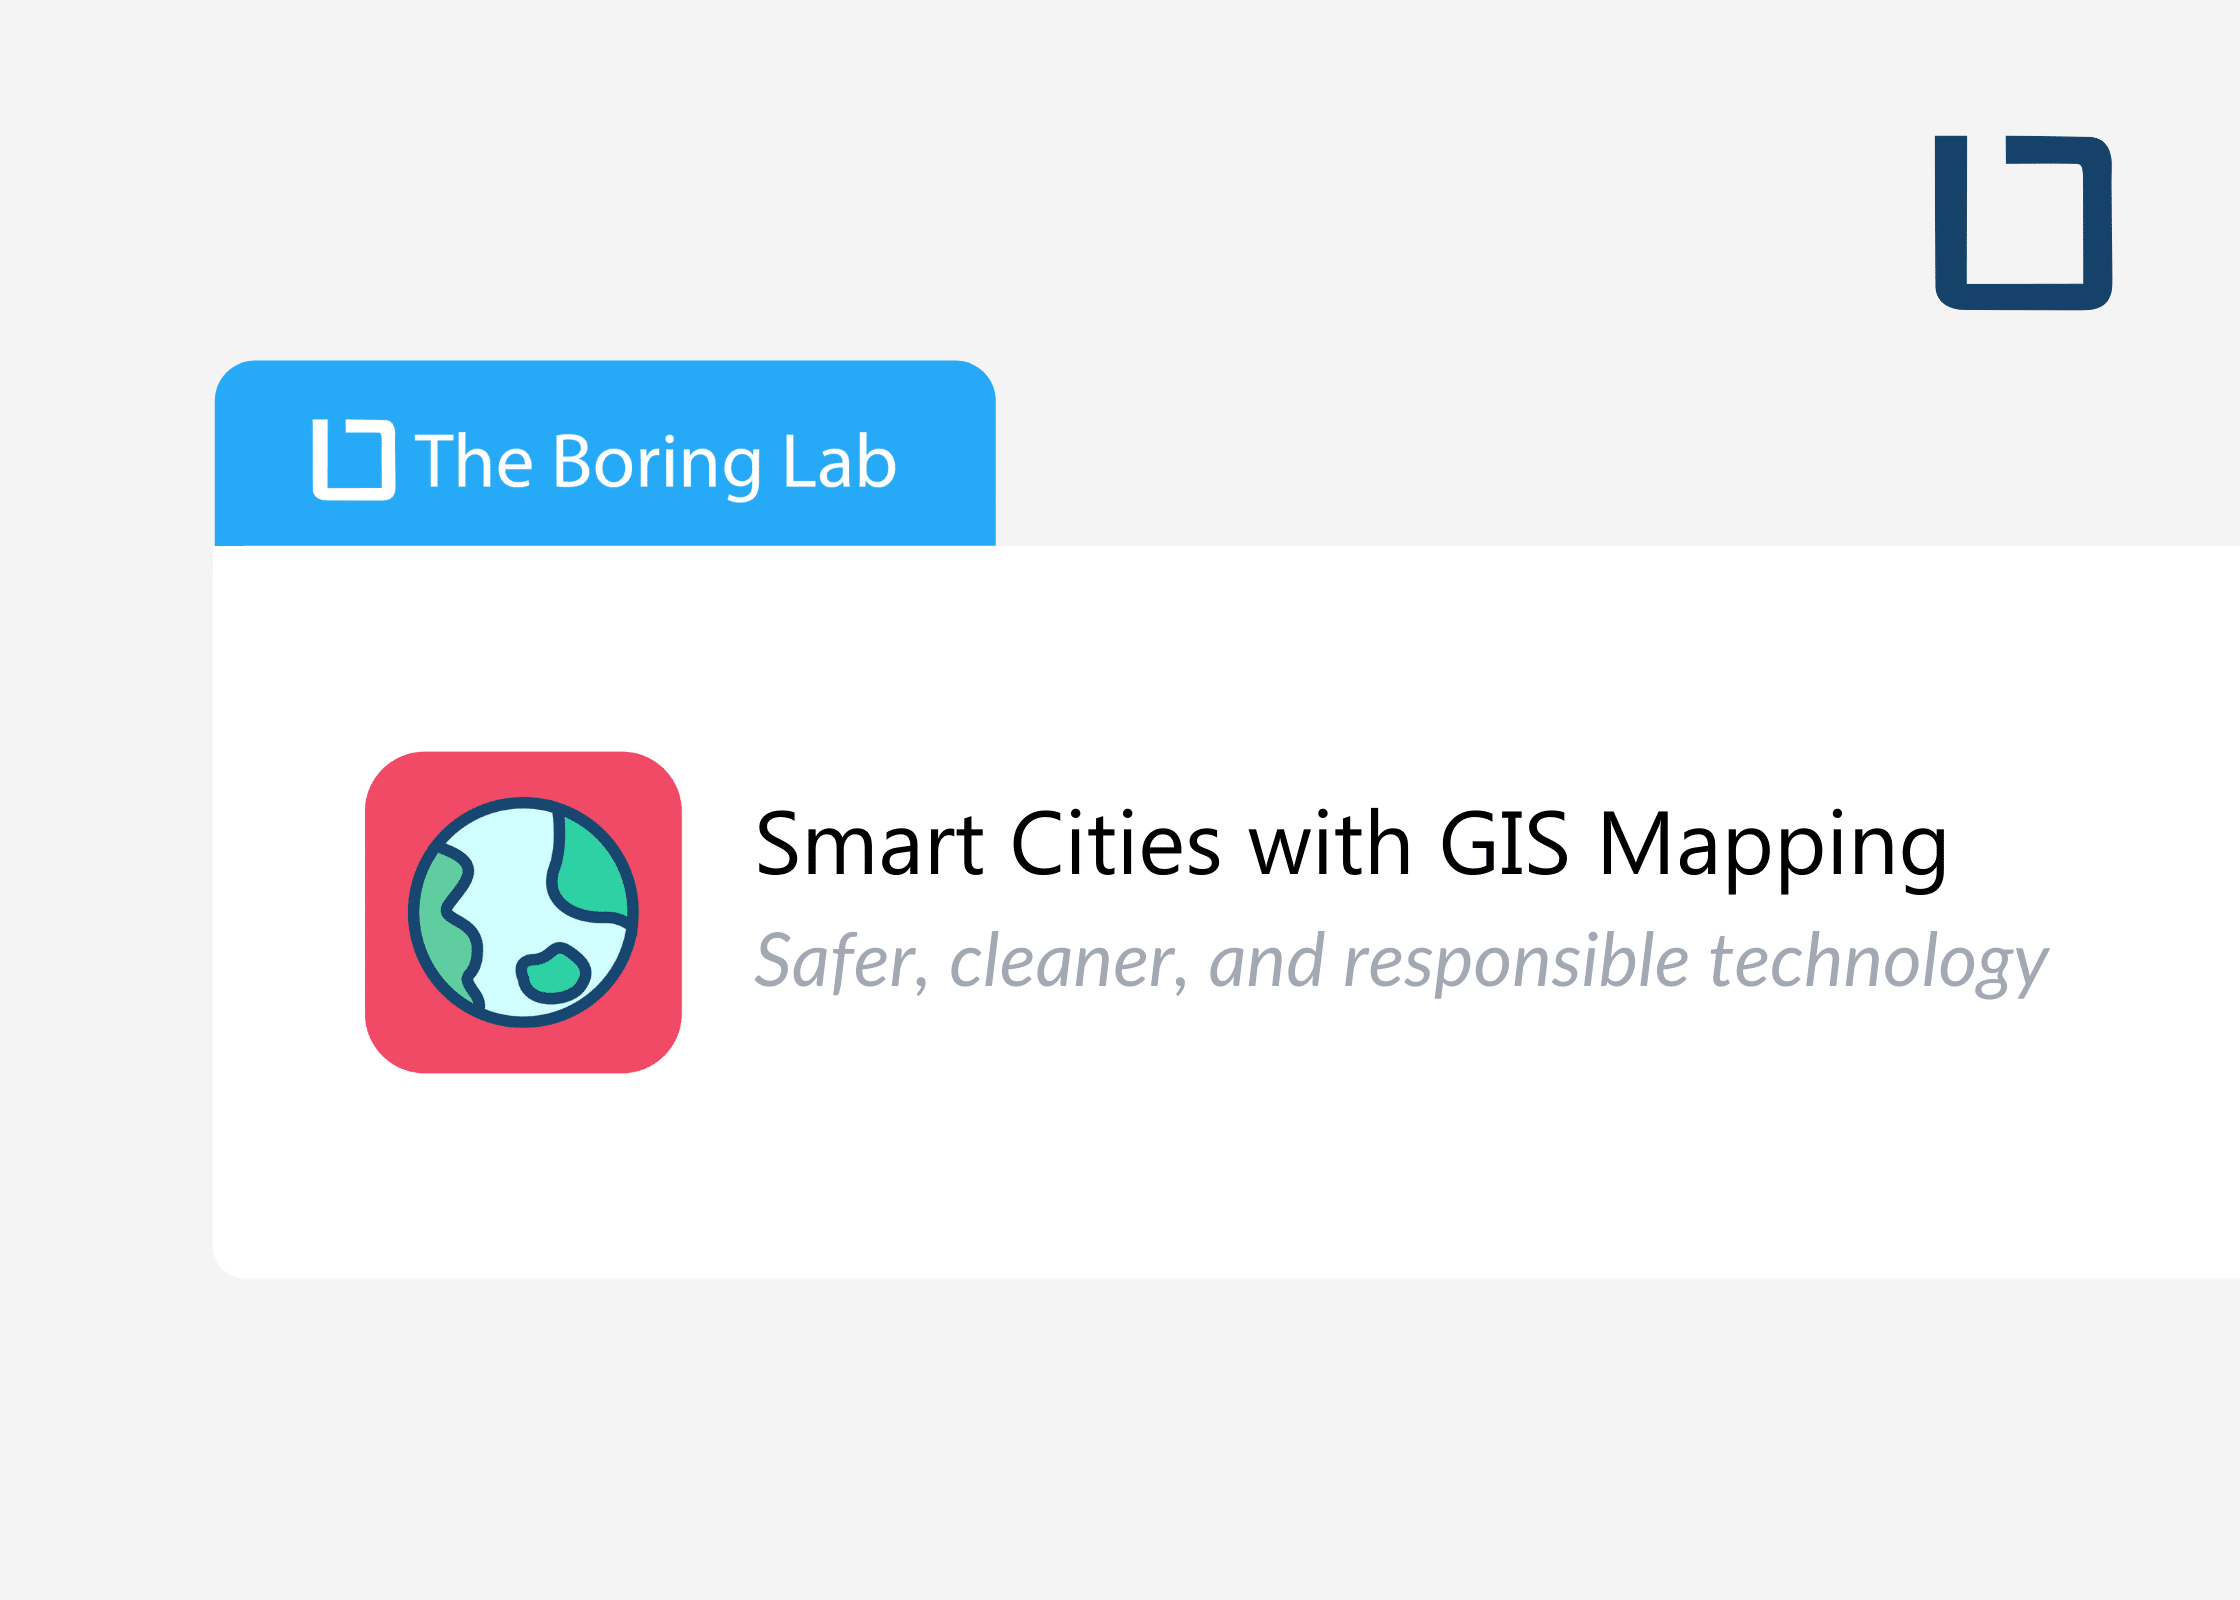 Smart Cities with GIS Mapping